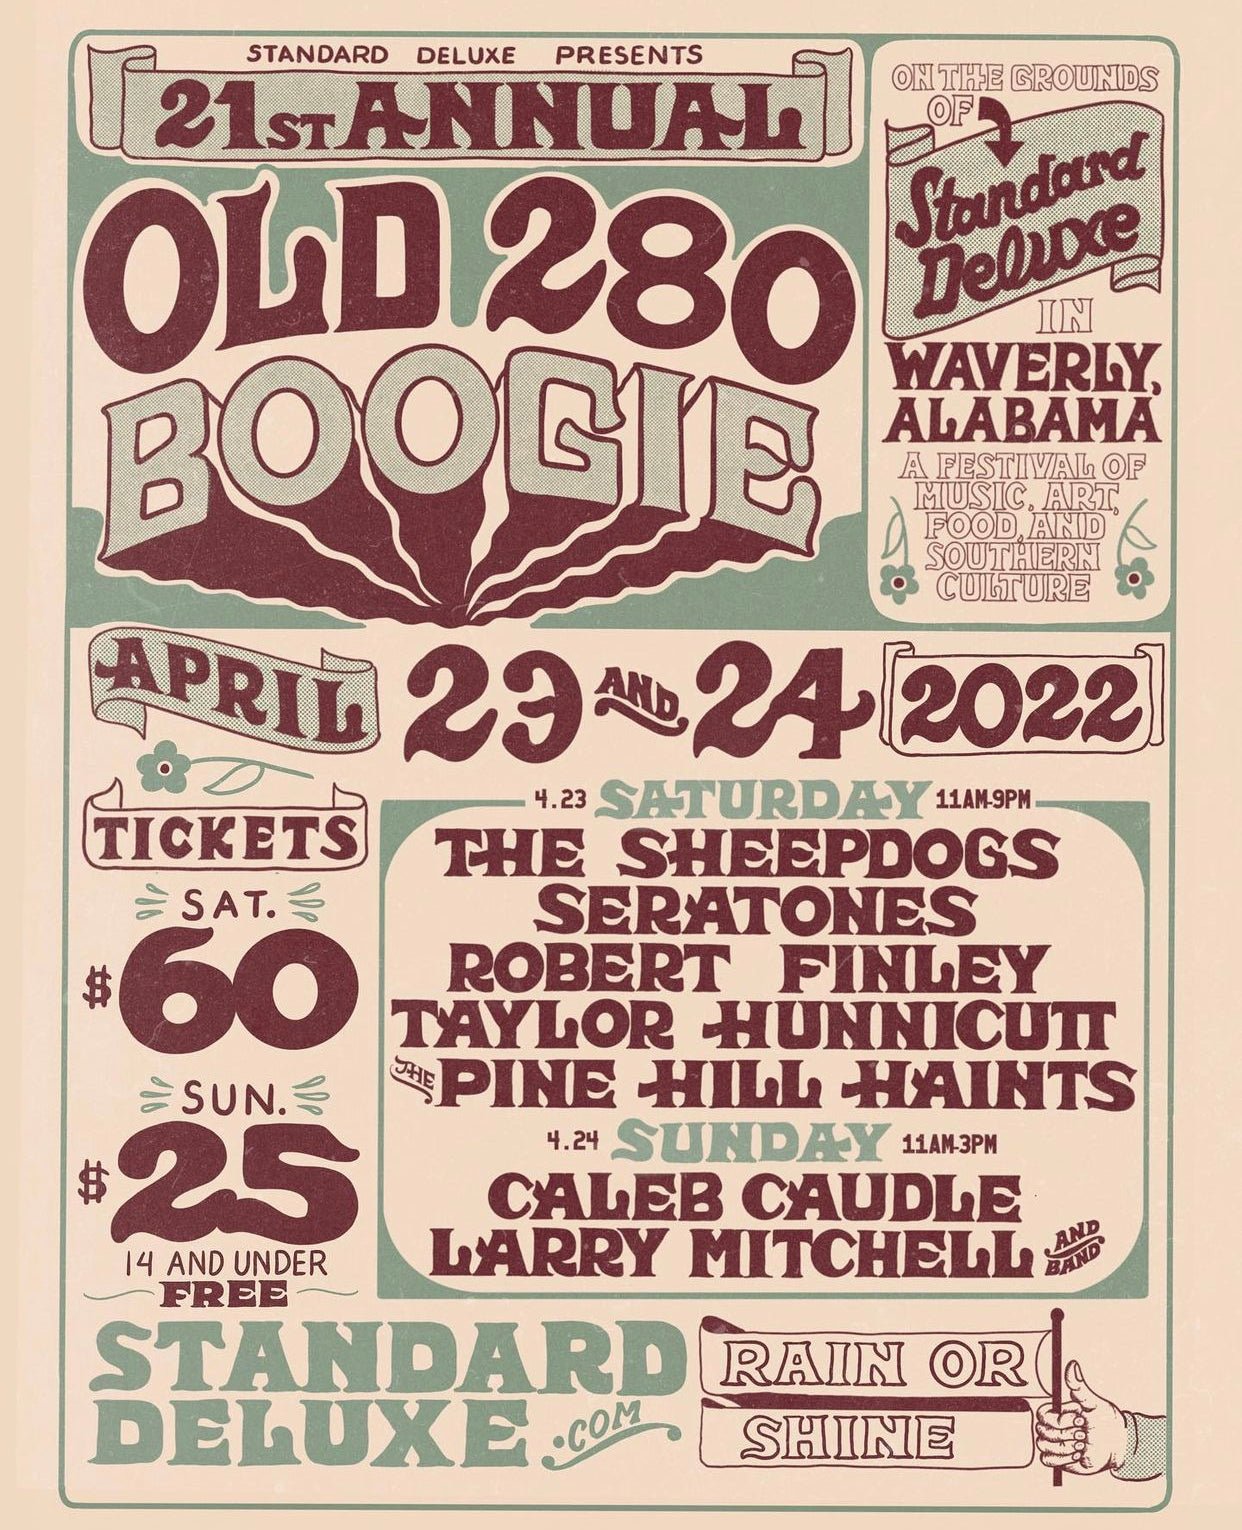 Standard Deluxe Presents the Old 280 Boogie April 23 & 24 - Alabama Sawyer